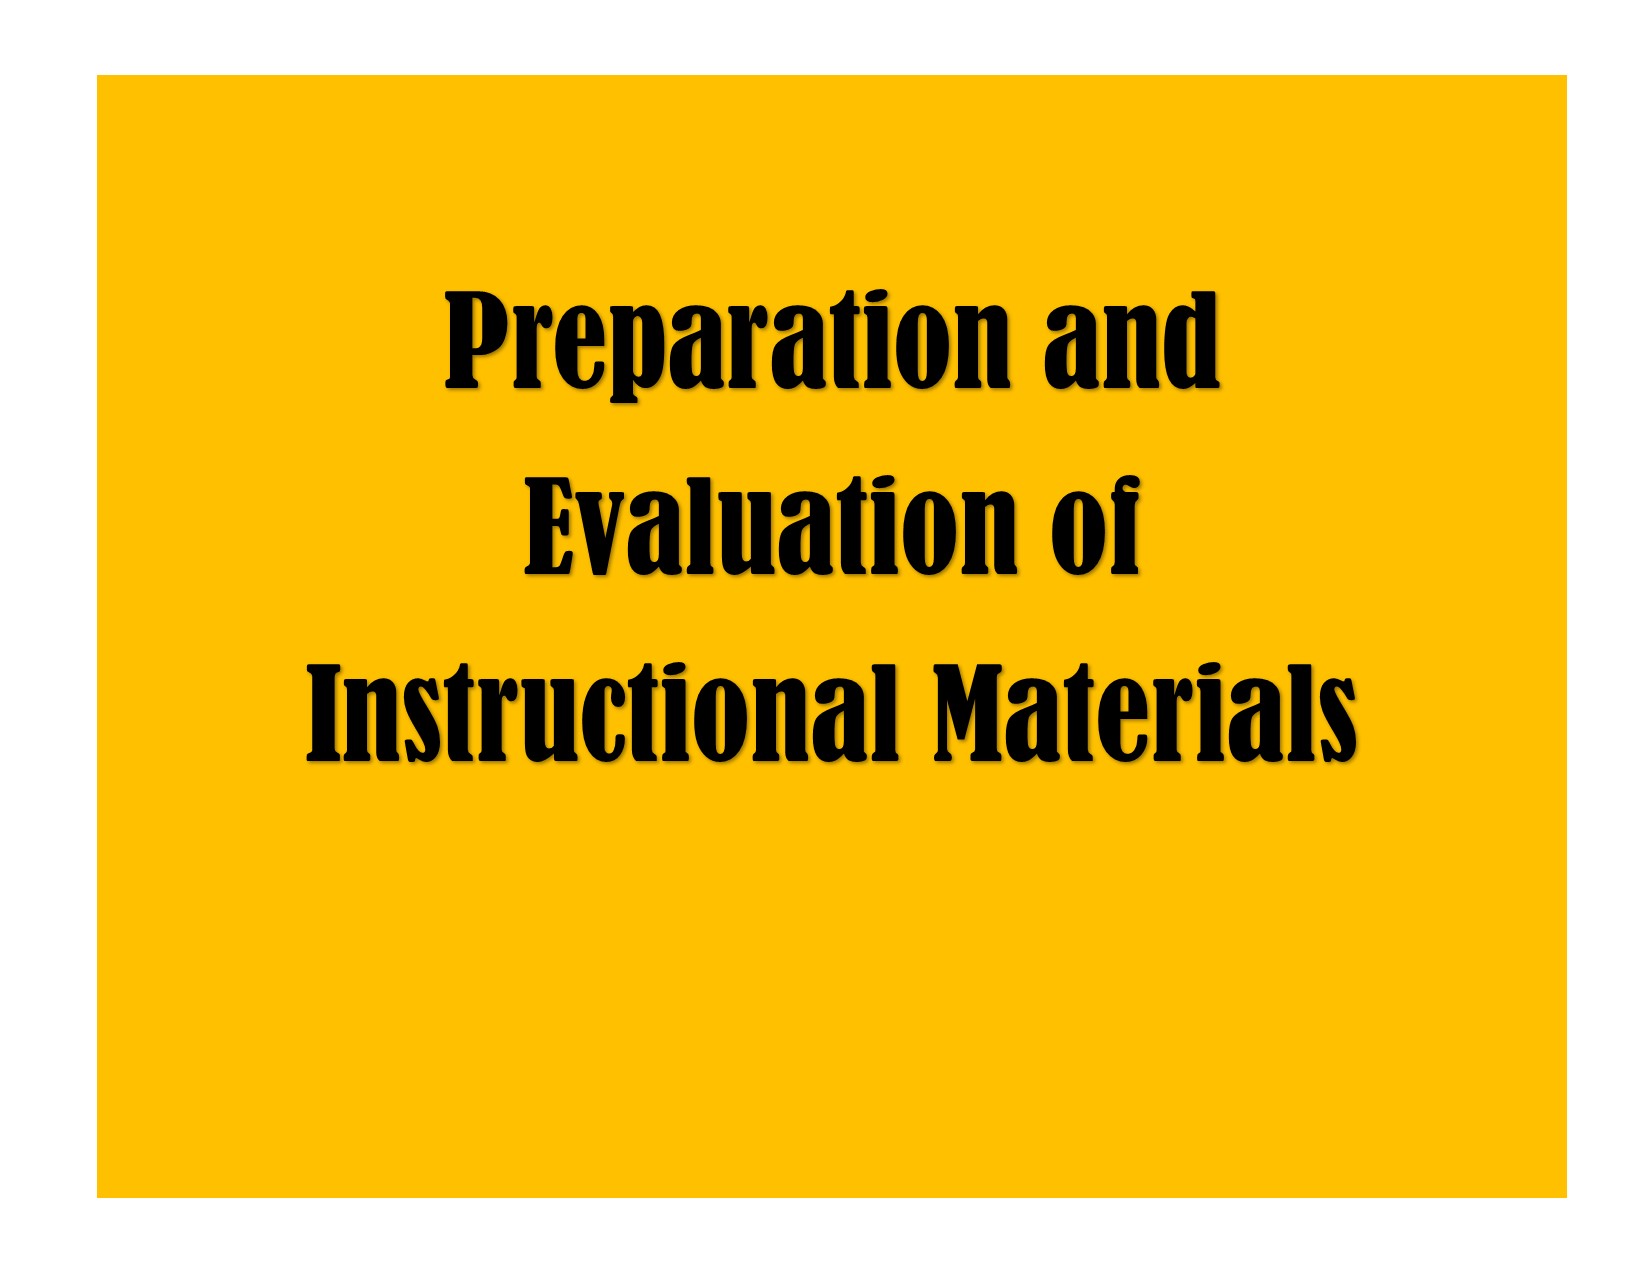 Preparation and Evaluation of Instructional Materials